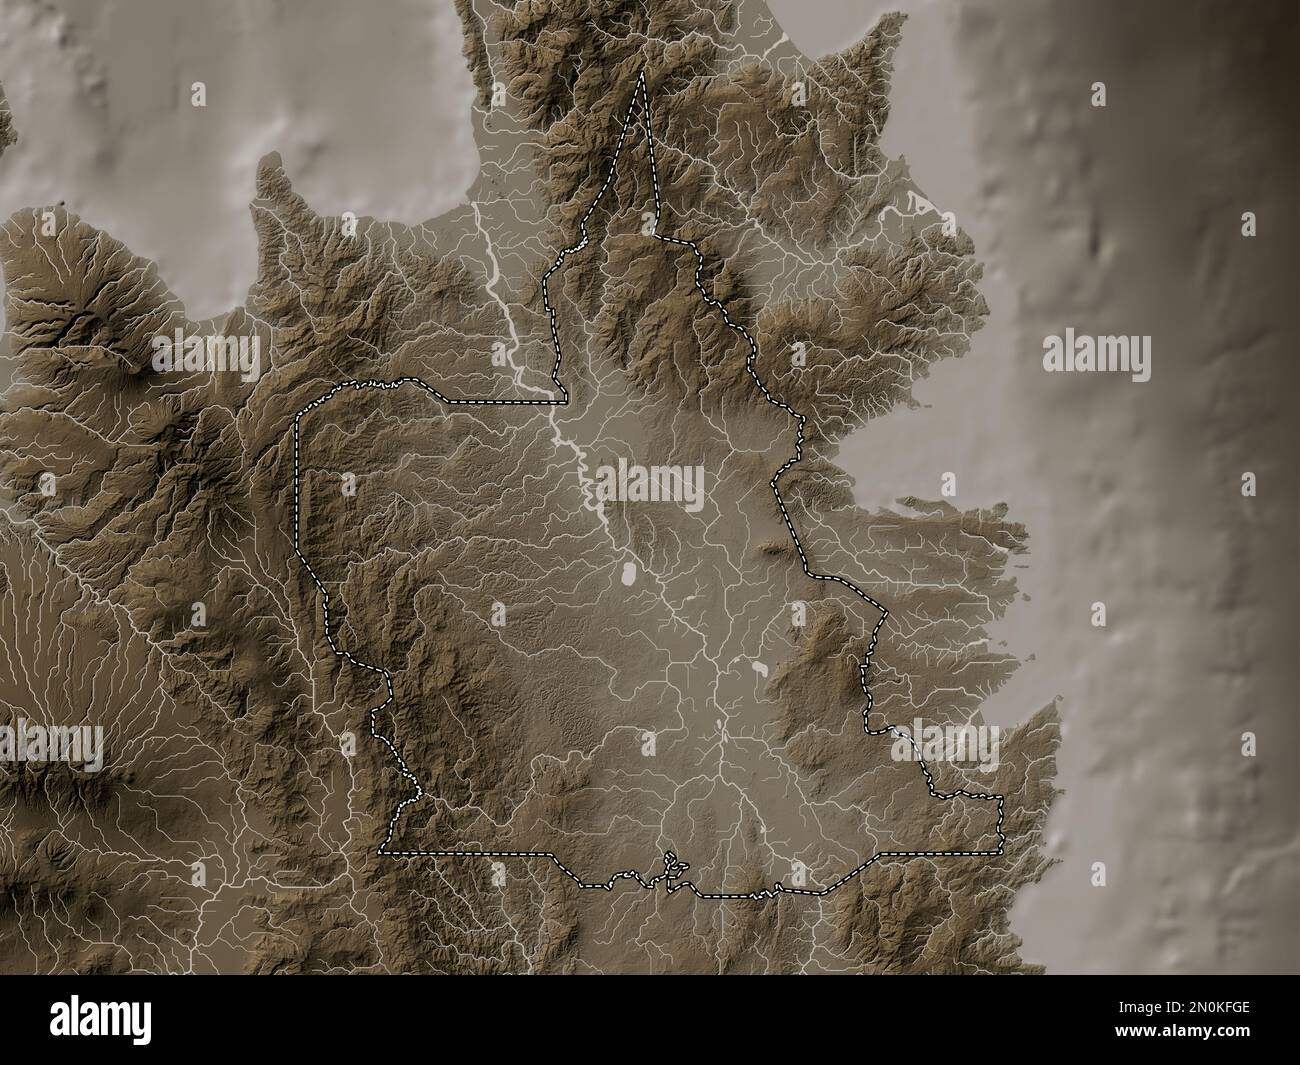 Agusan del Sur, province of Philippines. Elevation map colored in sepia tones with lakes and rivers Stock Photo